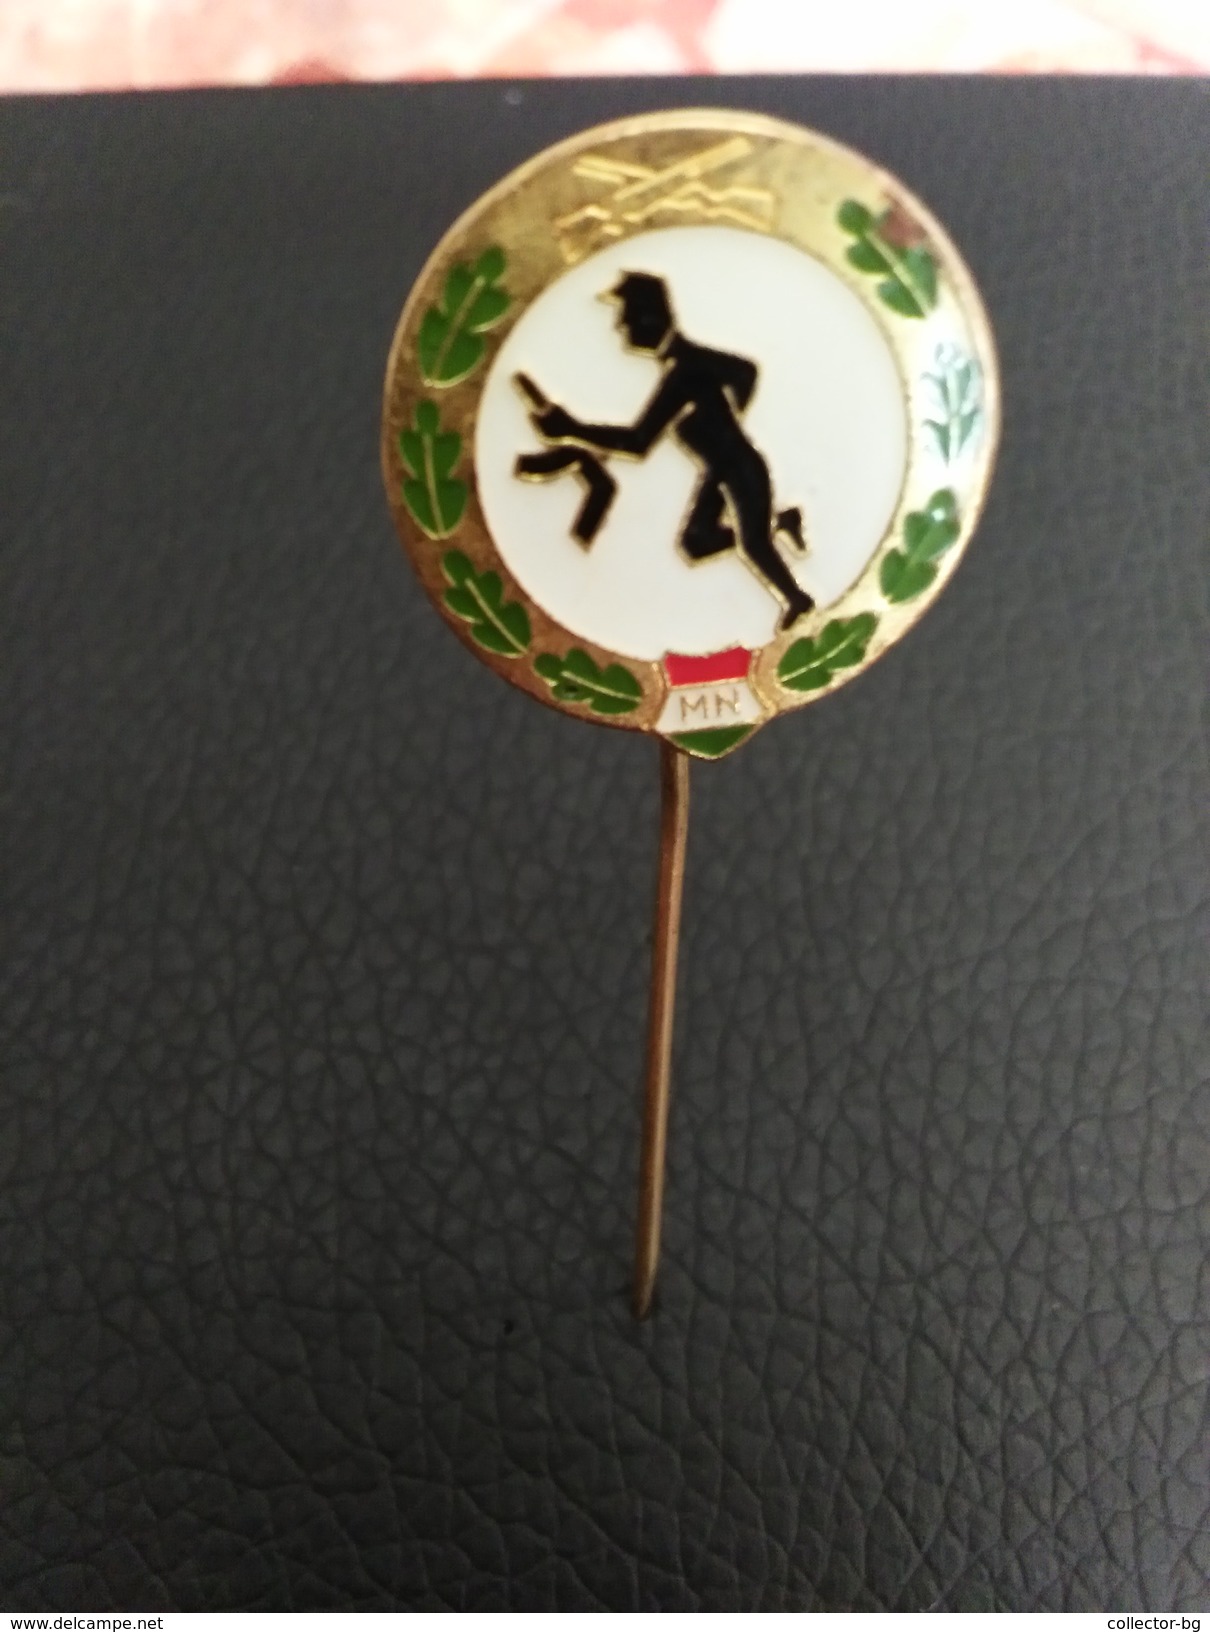 ULTRA RARE VINTAGE EXCELLENT SPORT SHOOTER ARMY MILITARY HUNGARY BADGE PIN TIMBRE - Army